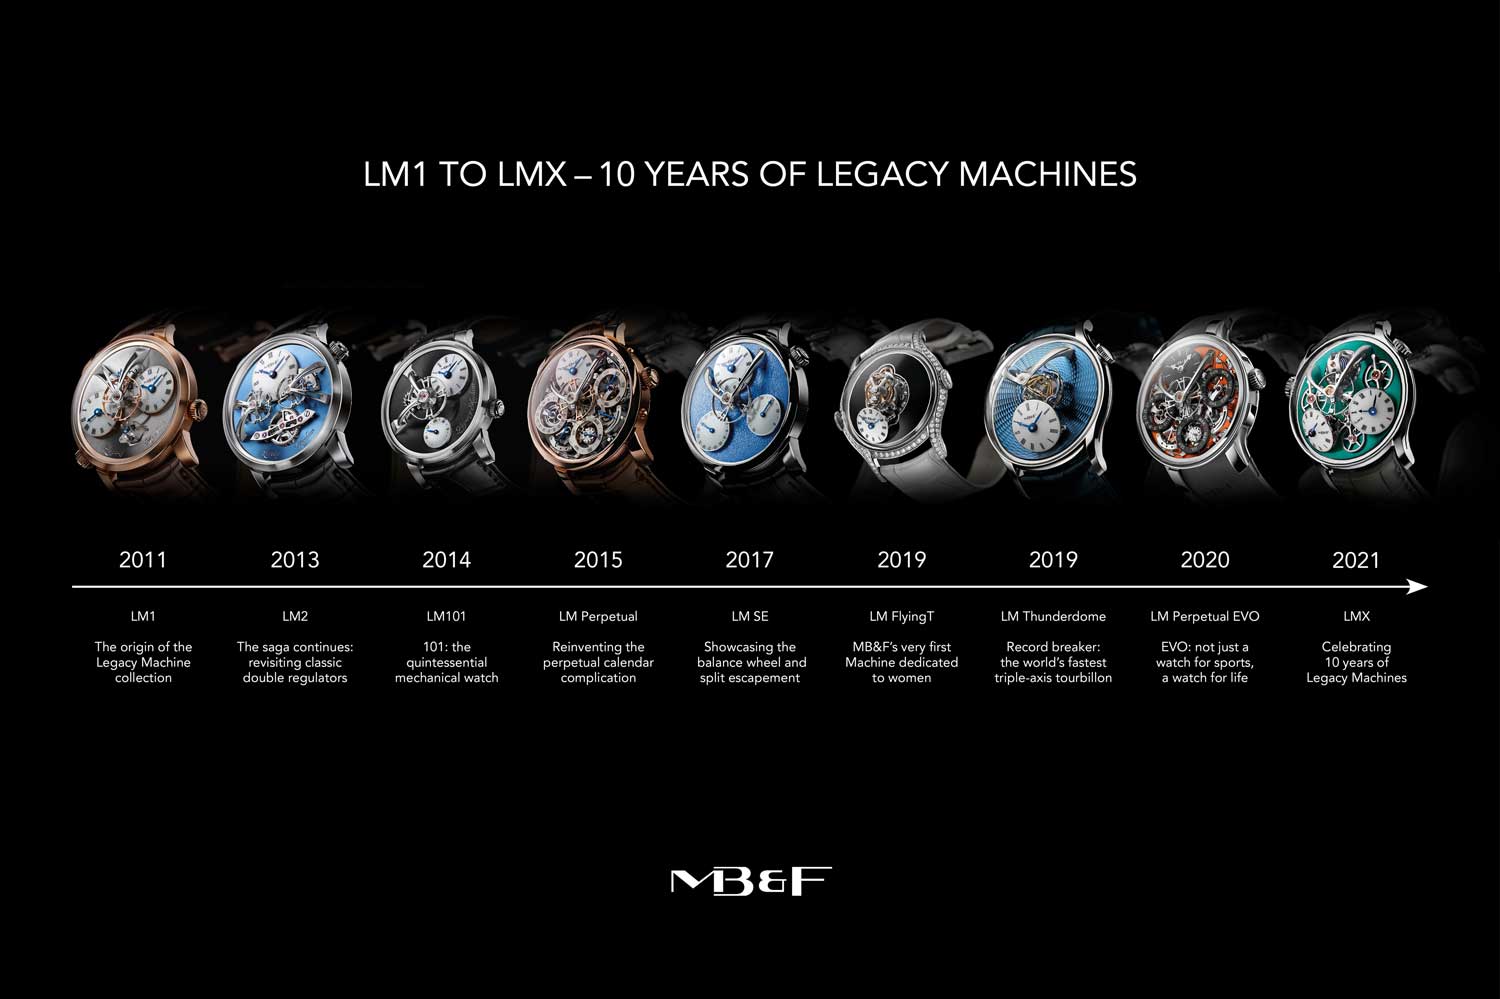 The MB&F Legacy Machines' Timeline